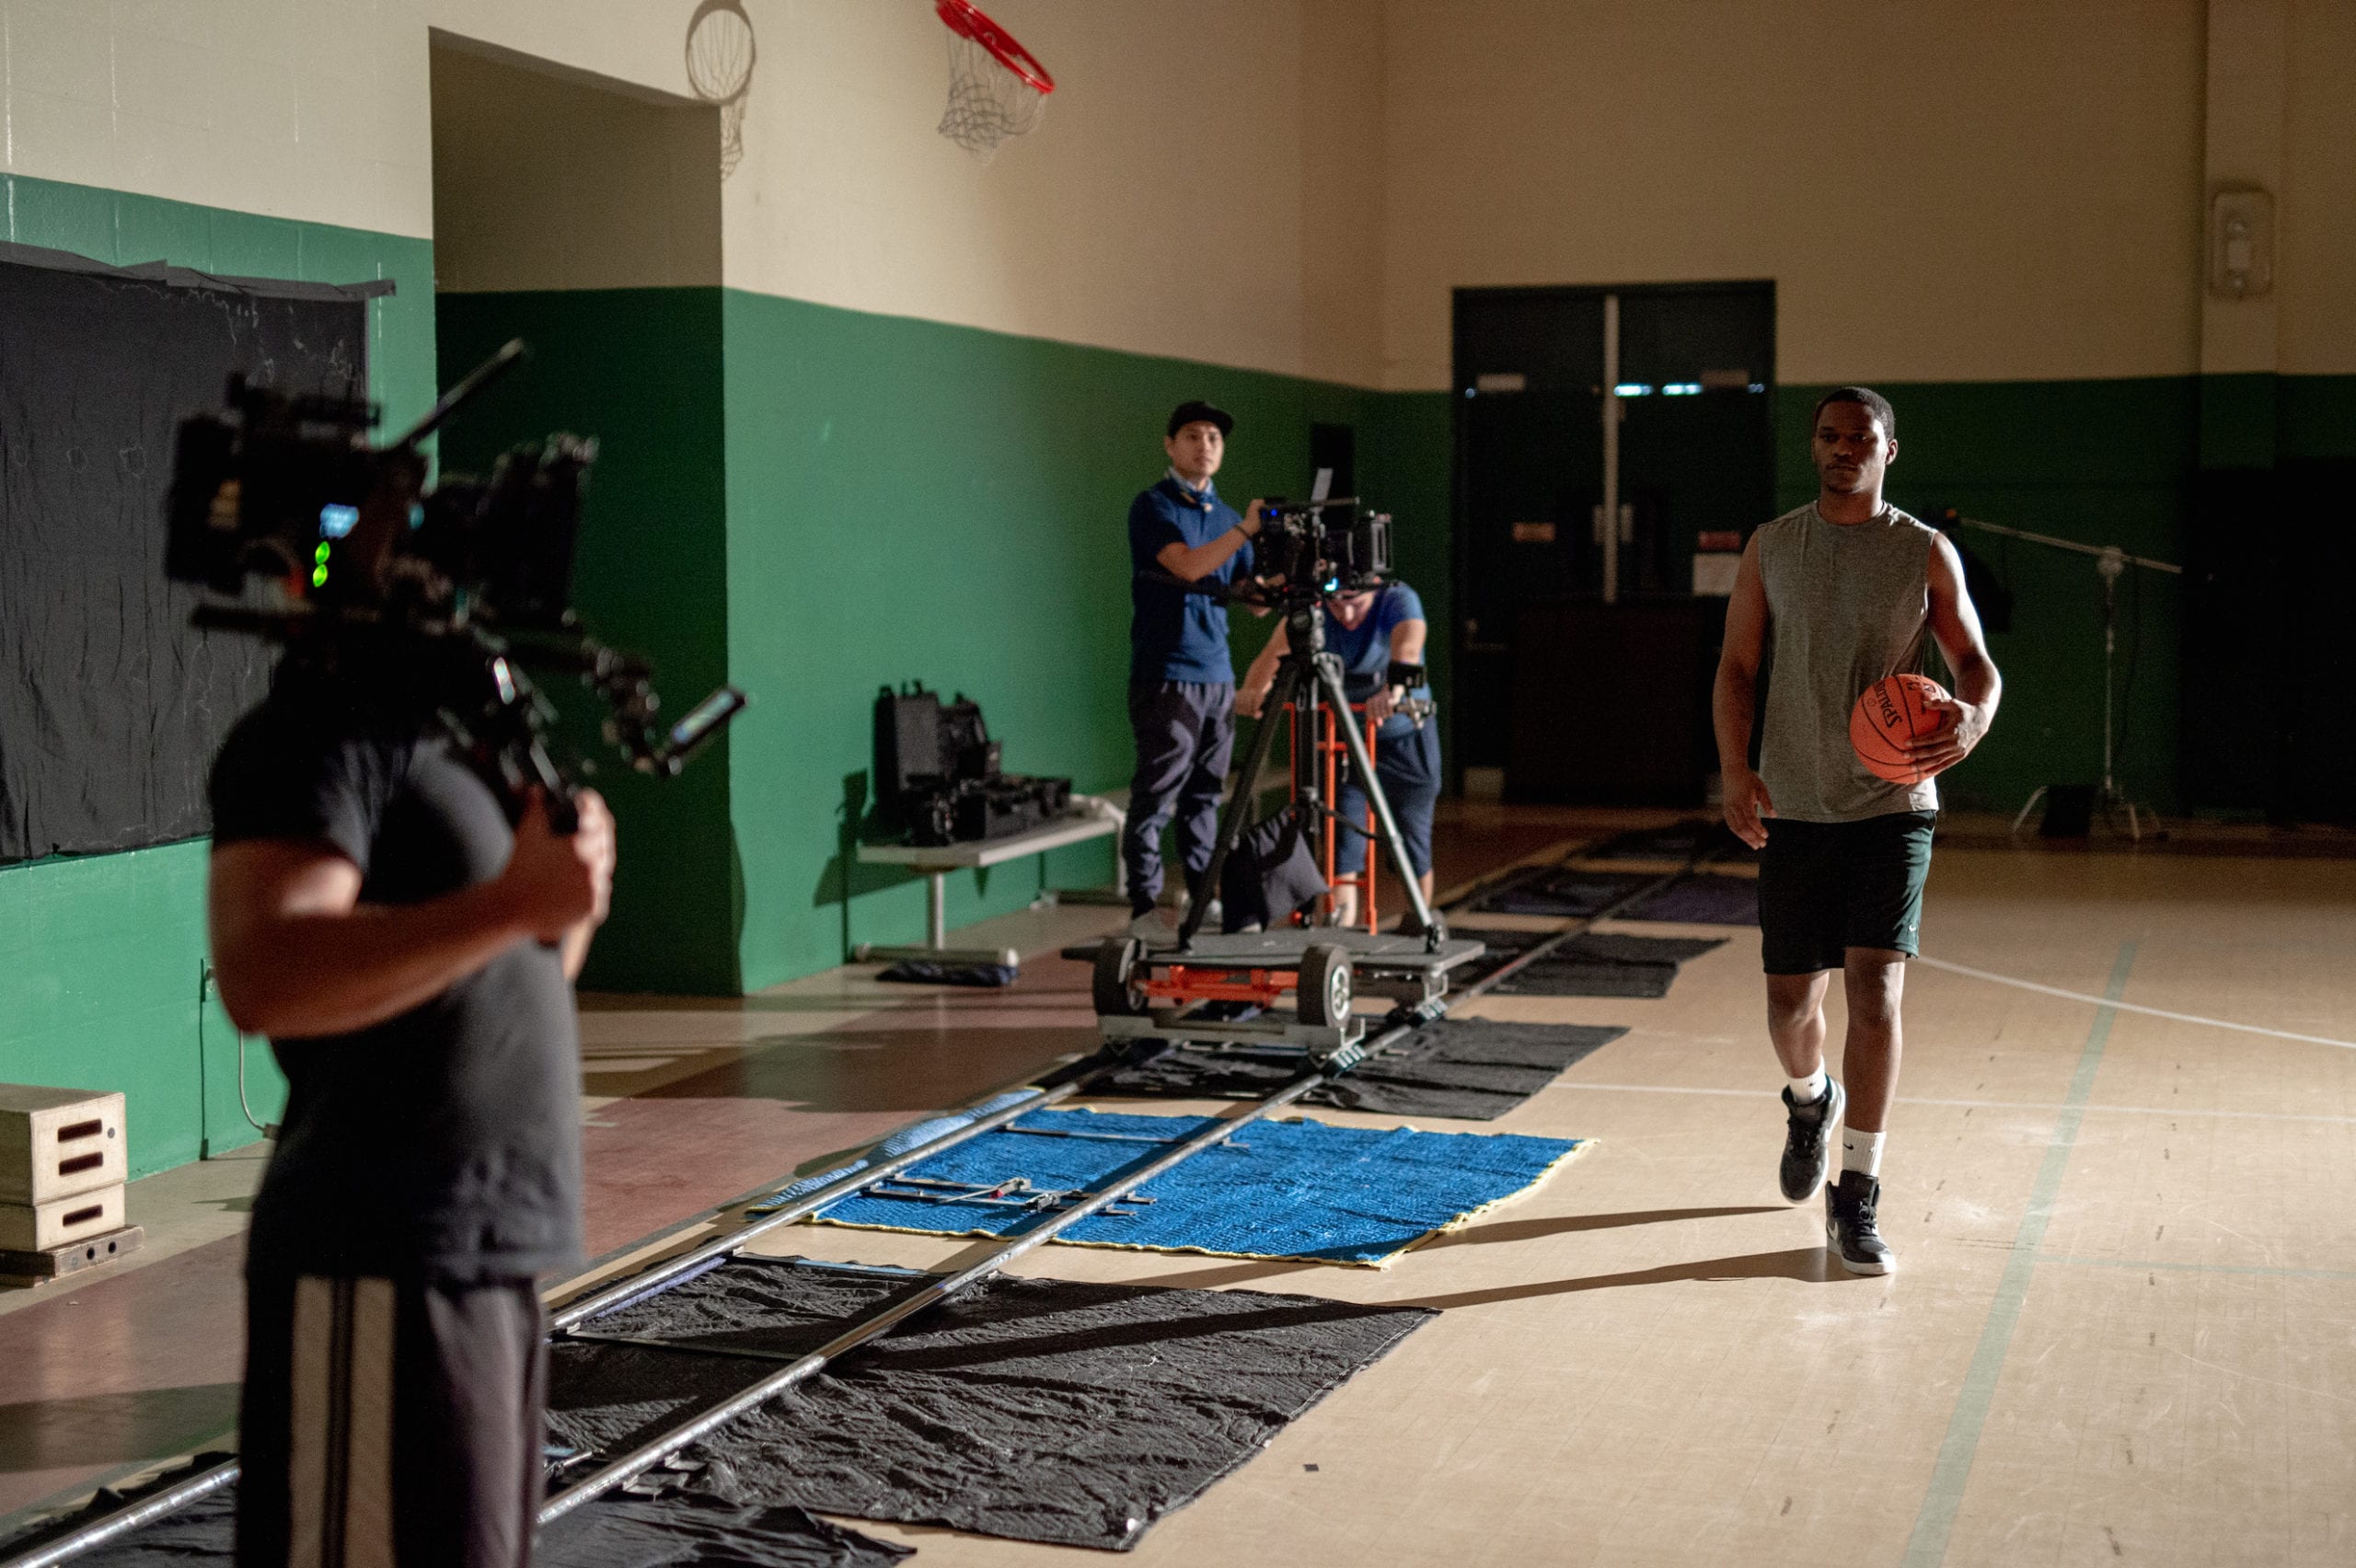 Nike scene being filmed on a basketball court in a gym with an African American man wearing a gray t shirt holding a ball walking on the court surrounded by a film crew